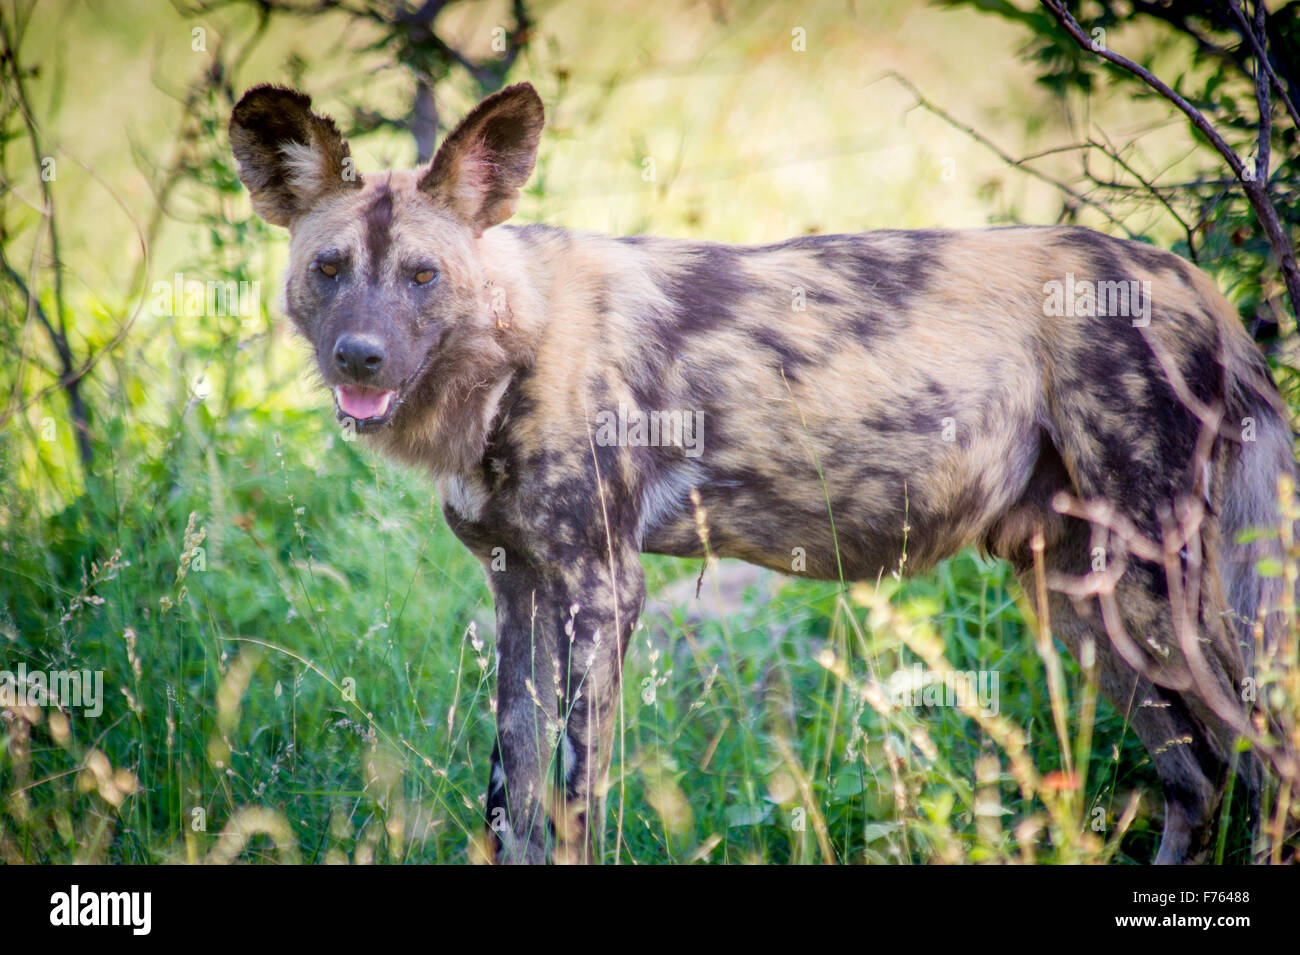 SOUTH AFRICA- Kruger National Park  African Wild Dog (Lycaon pictus) Stock Photo